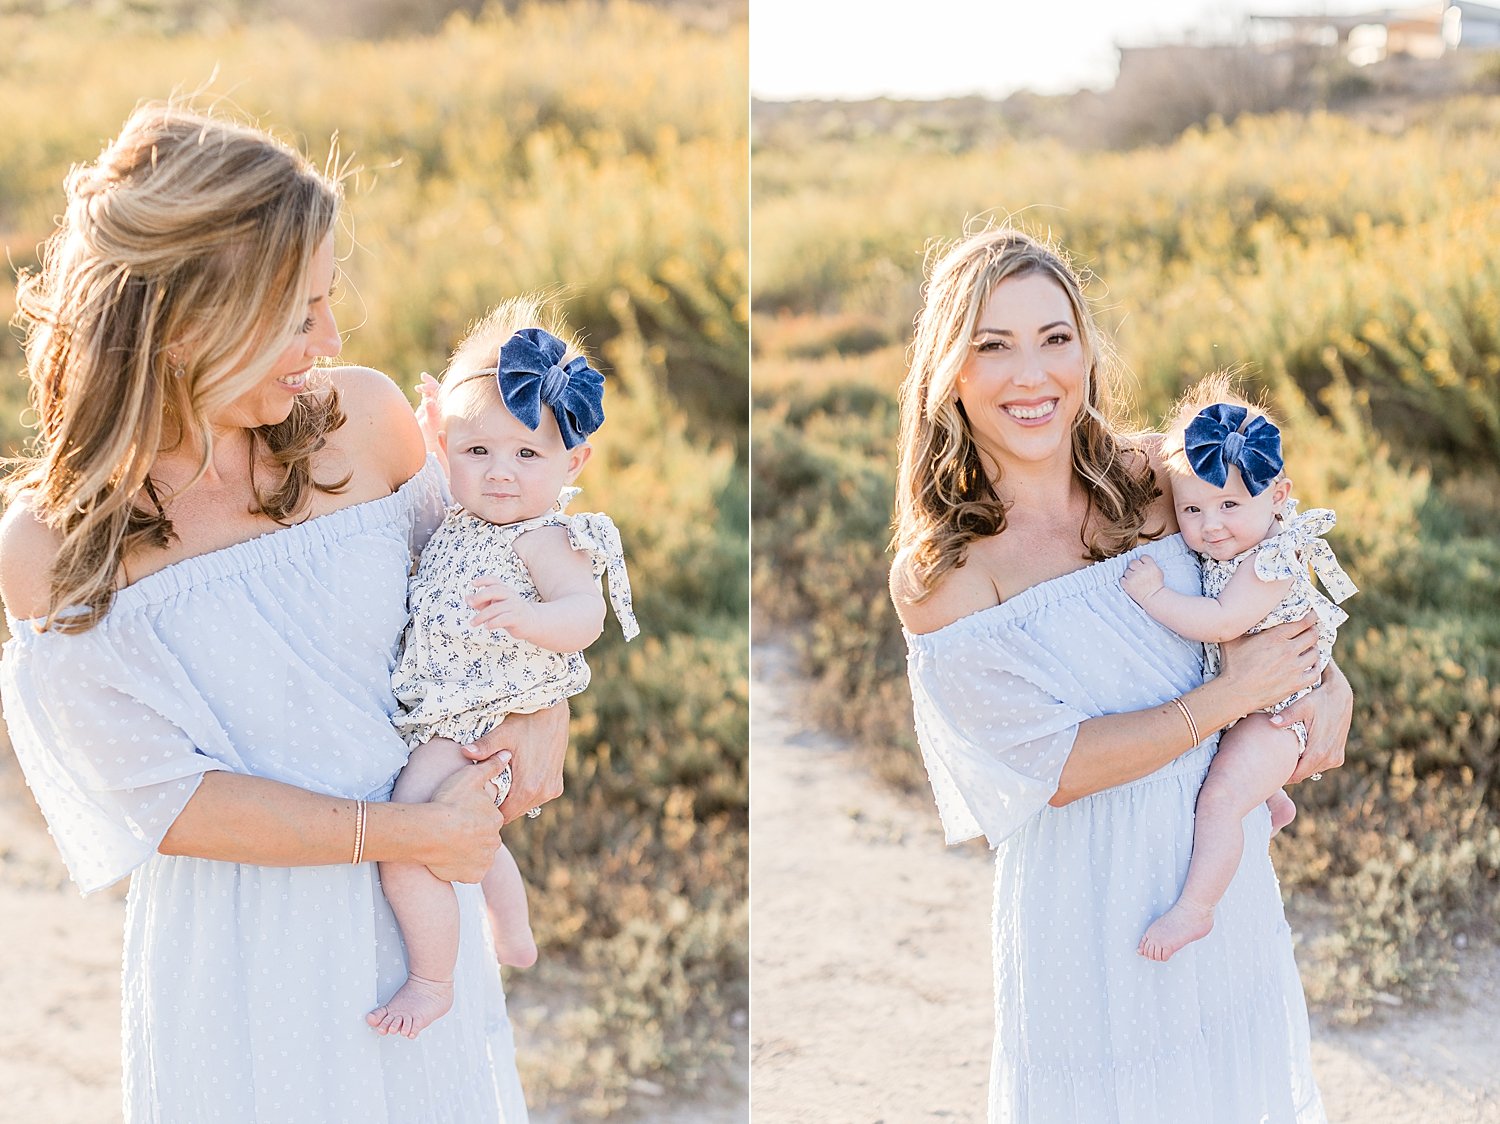 Mom with baby girl | Ambre Williams Photography